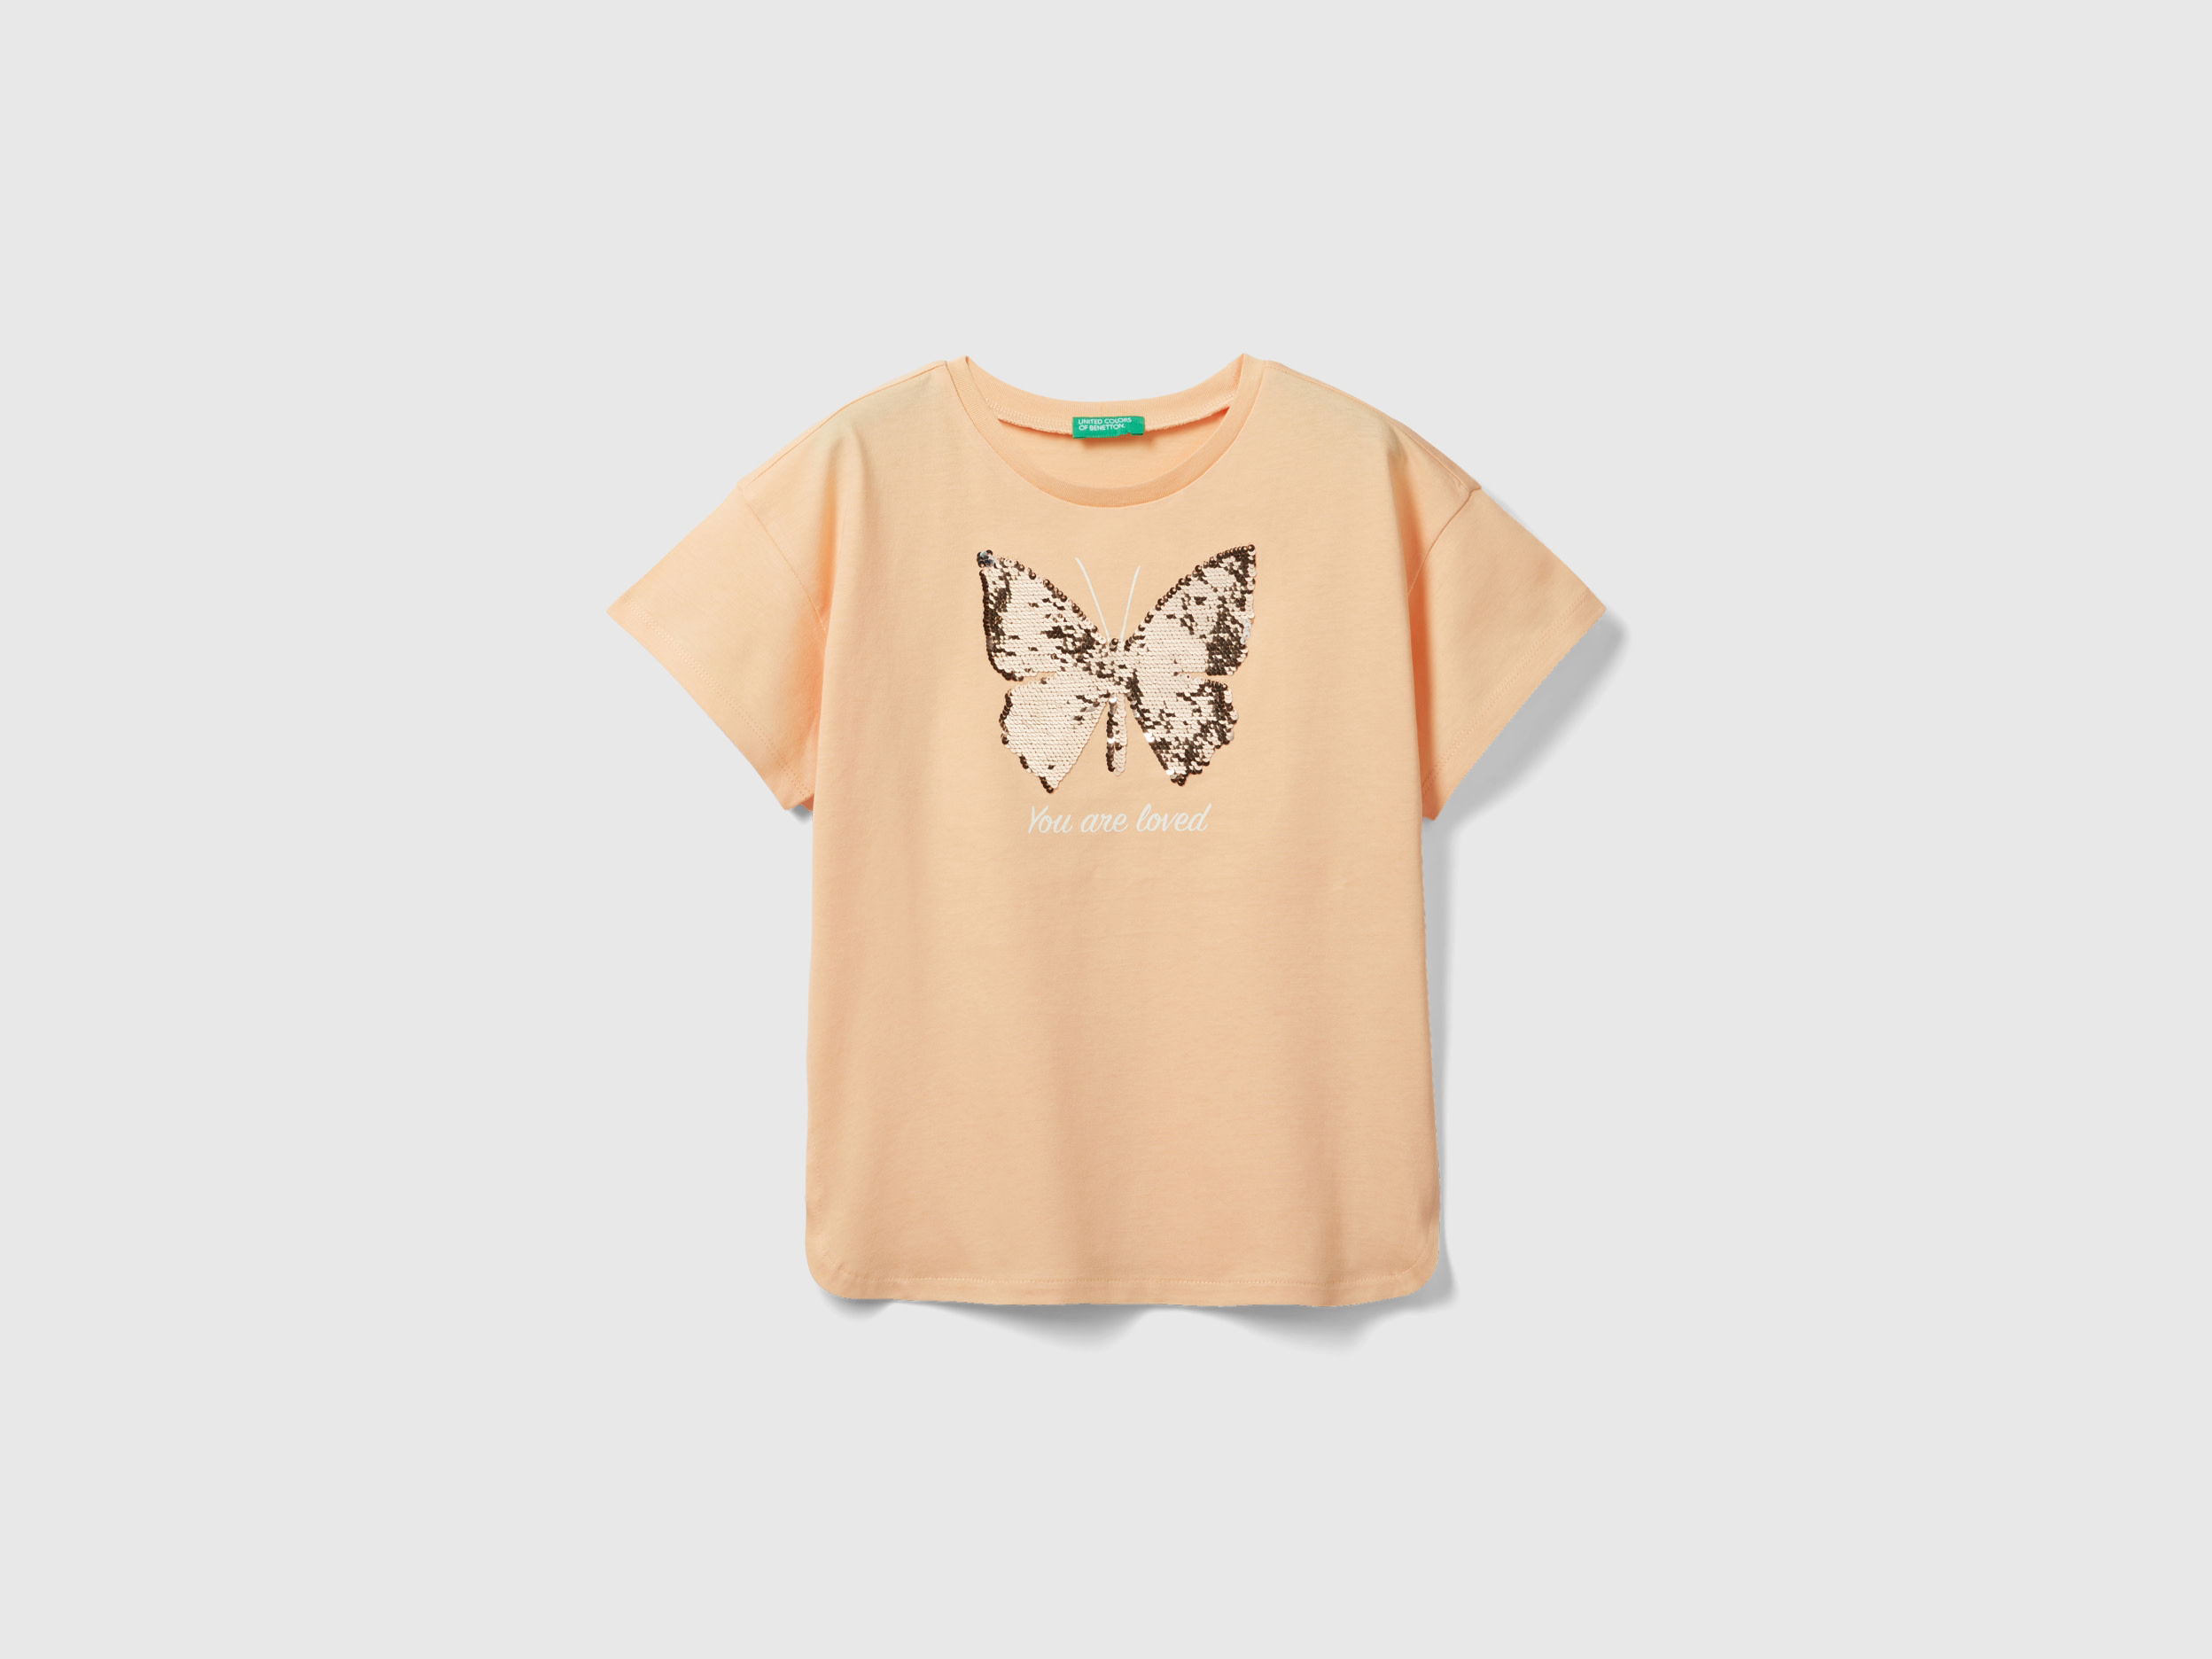 Image of Benetton, T-shirt With Reversible Sequins, size M, Peach, Kids